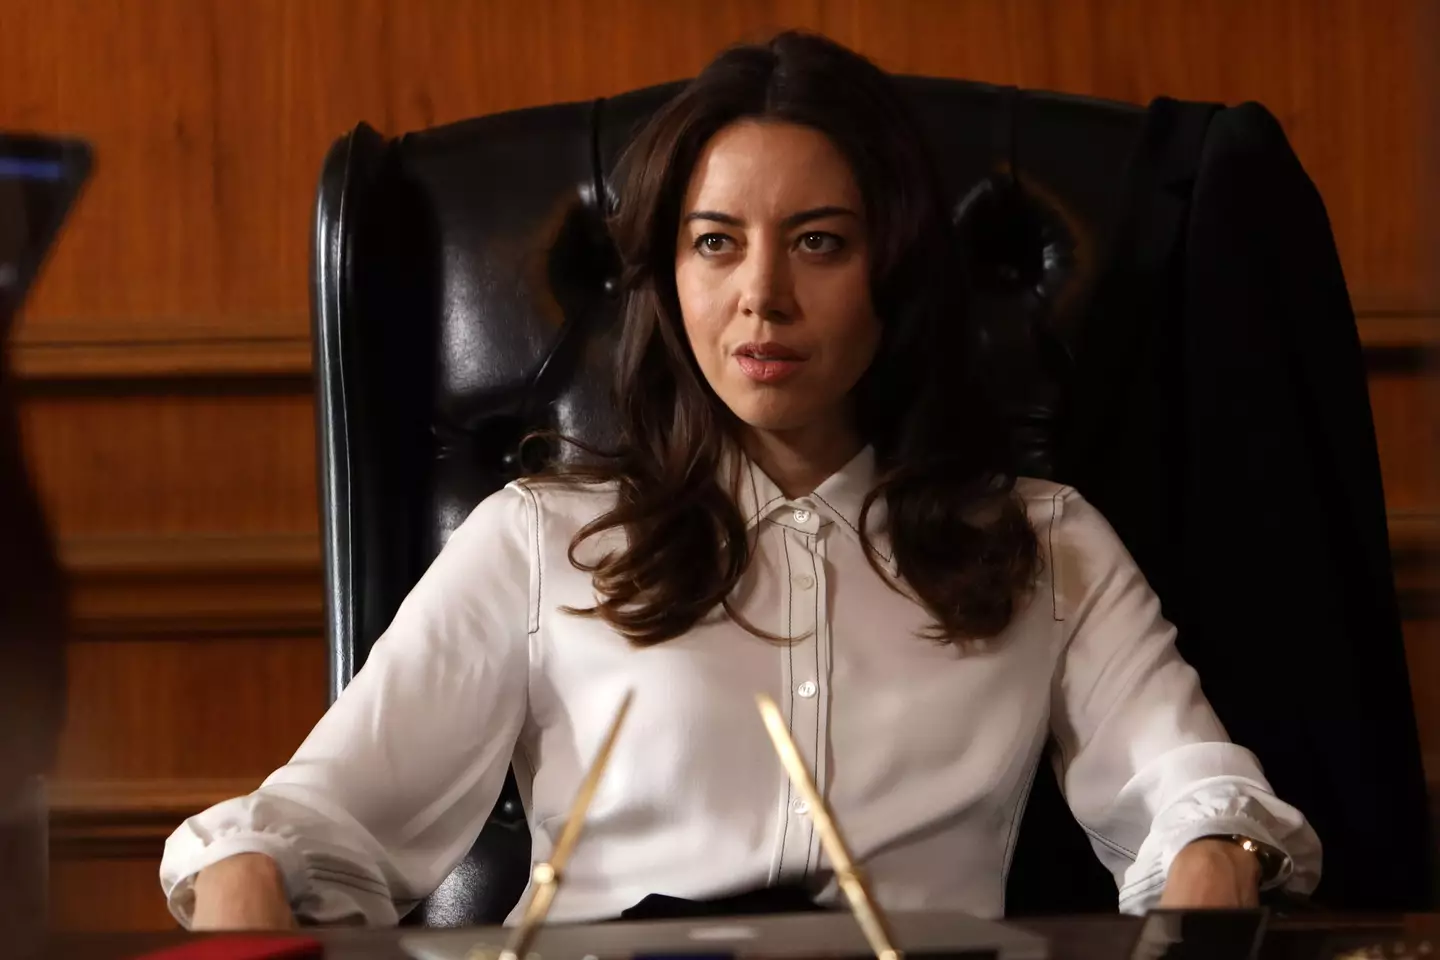 Aubrey Plaza explained that her friends thought she was joking about having a stroke at first.